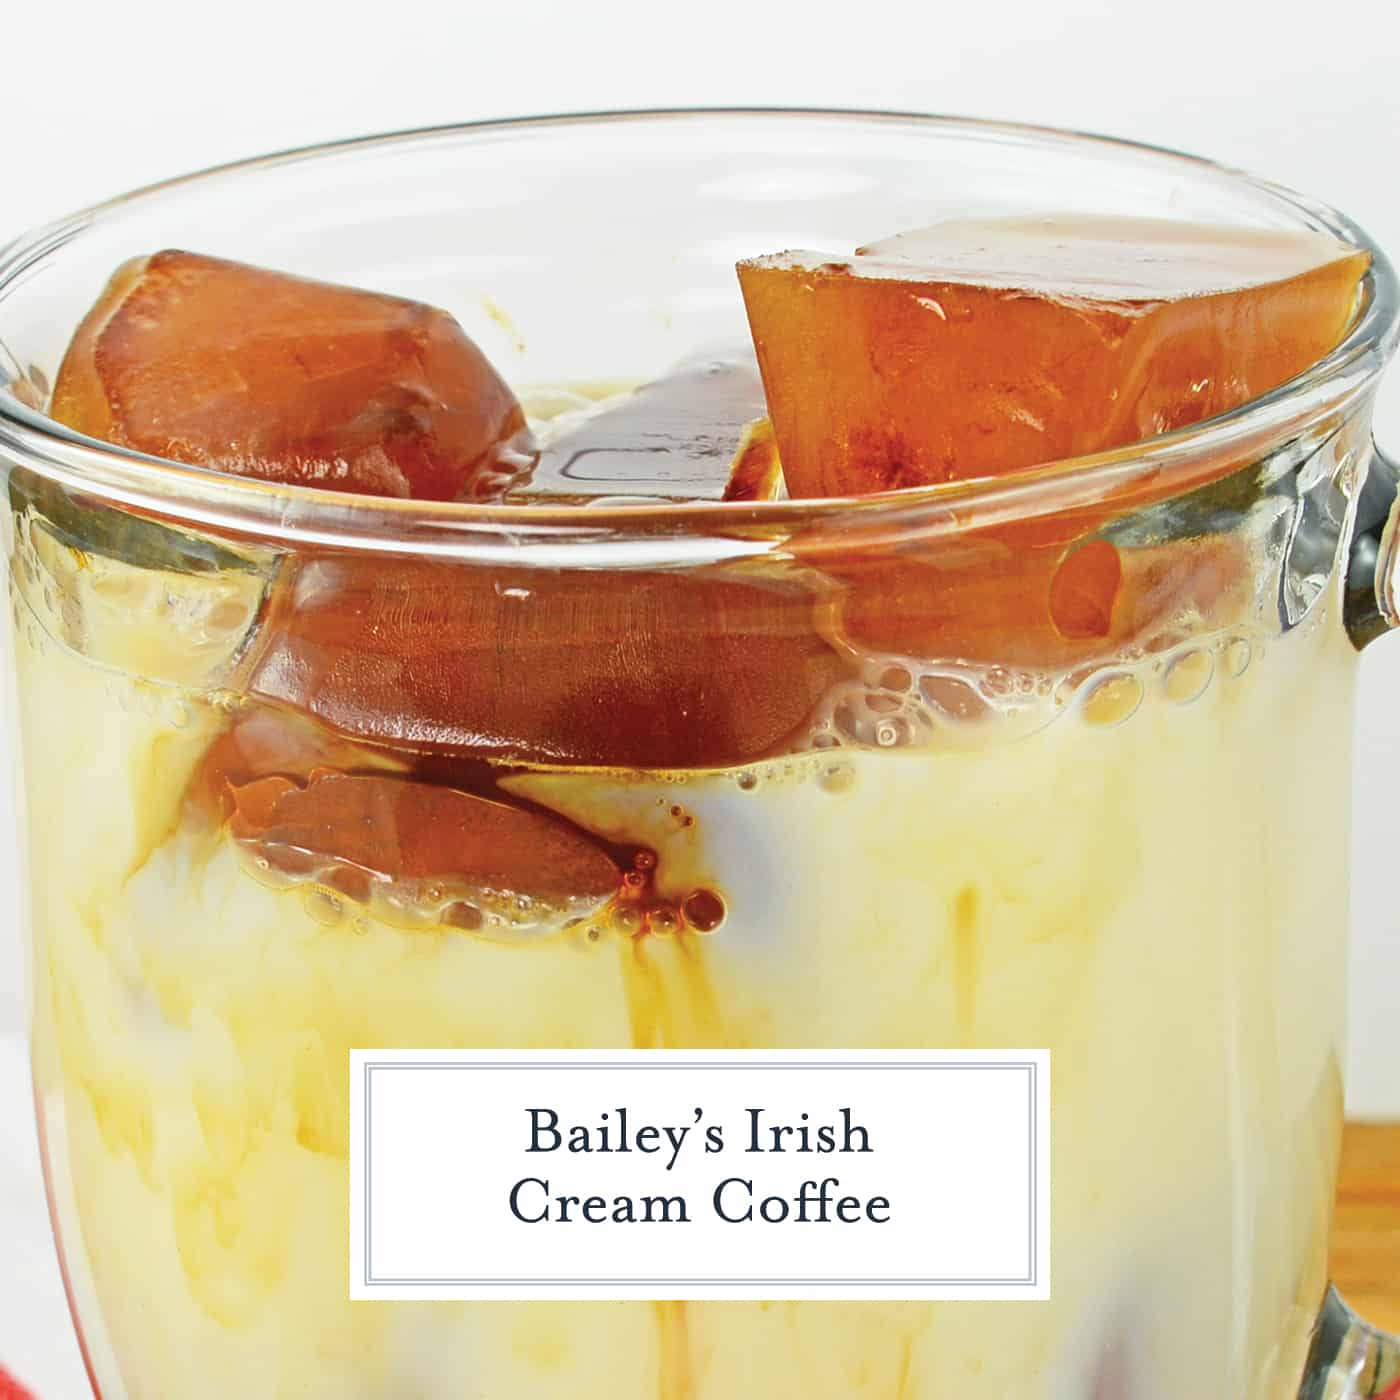 Bailey's Irish Cream Coffee is sweet and comforting Irish cream drink recipe. This coffee cocktail perfect for busy mornings or brunch year-round. #baileysirishcreamcoffee #irishcreamdrinkrecipes #coffeecocktails www.savoryexperiments.com